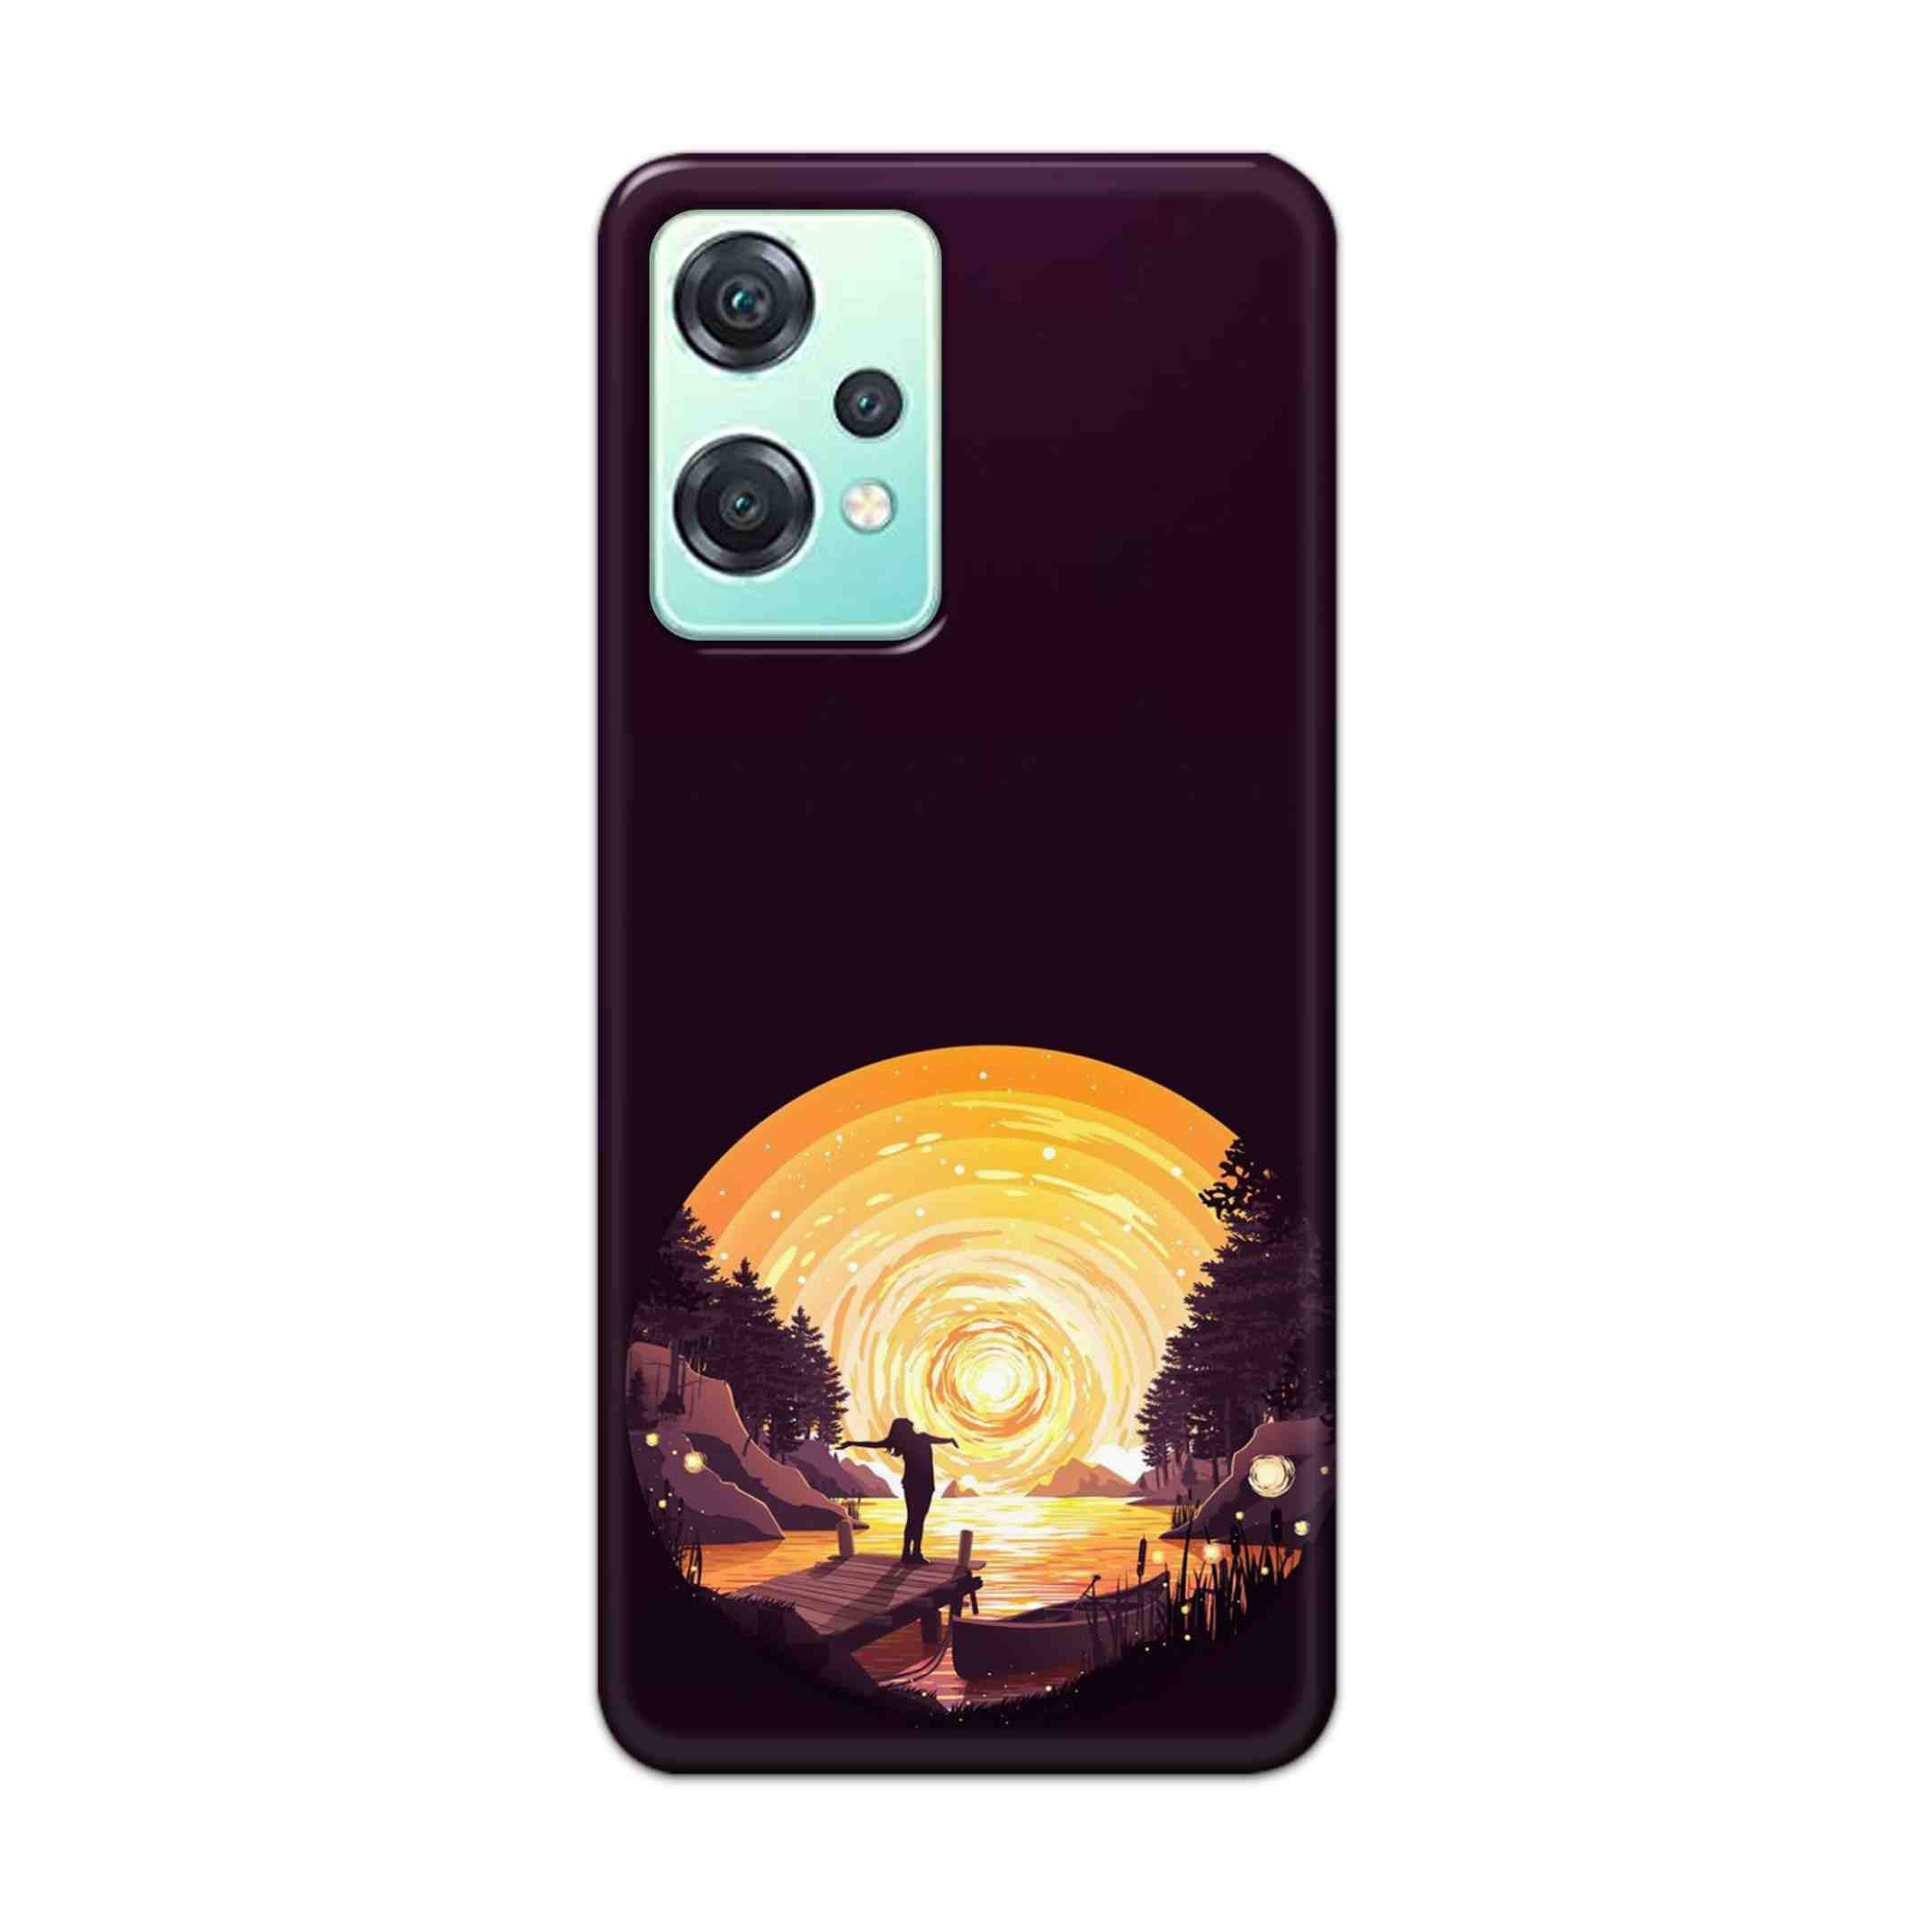 Buy Night Sunrise Hard Back Mobile Phone Case Cover For OnePlus Nord CE 2 Lite 5G Online